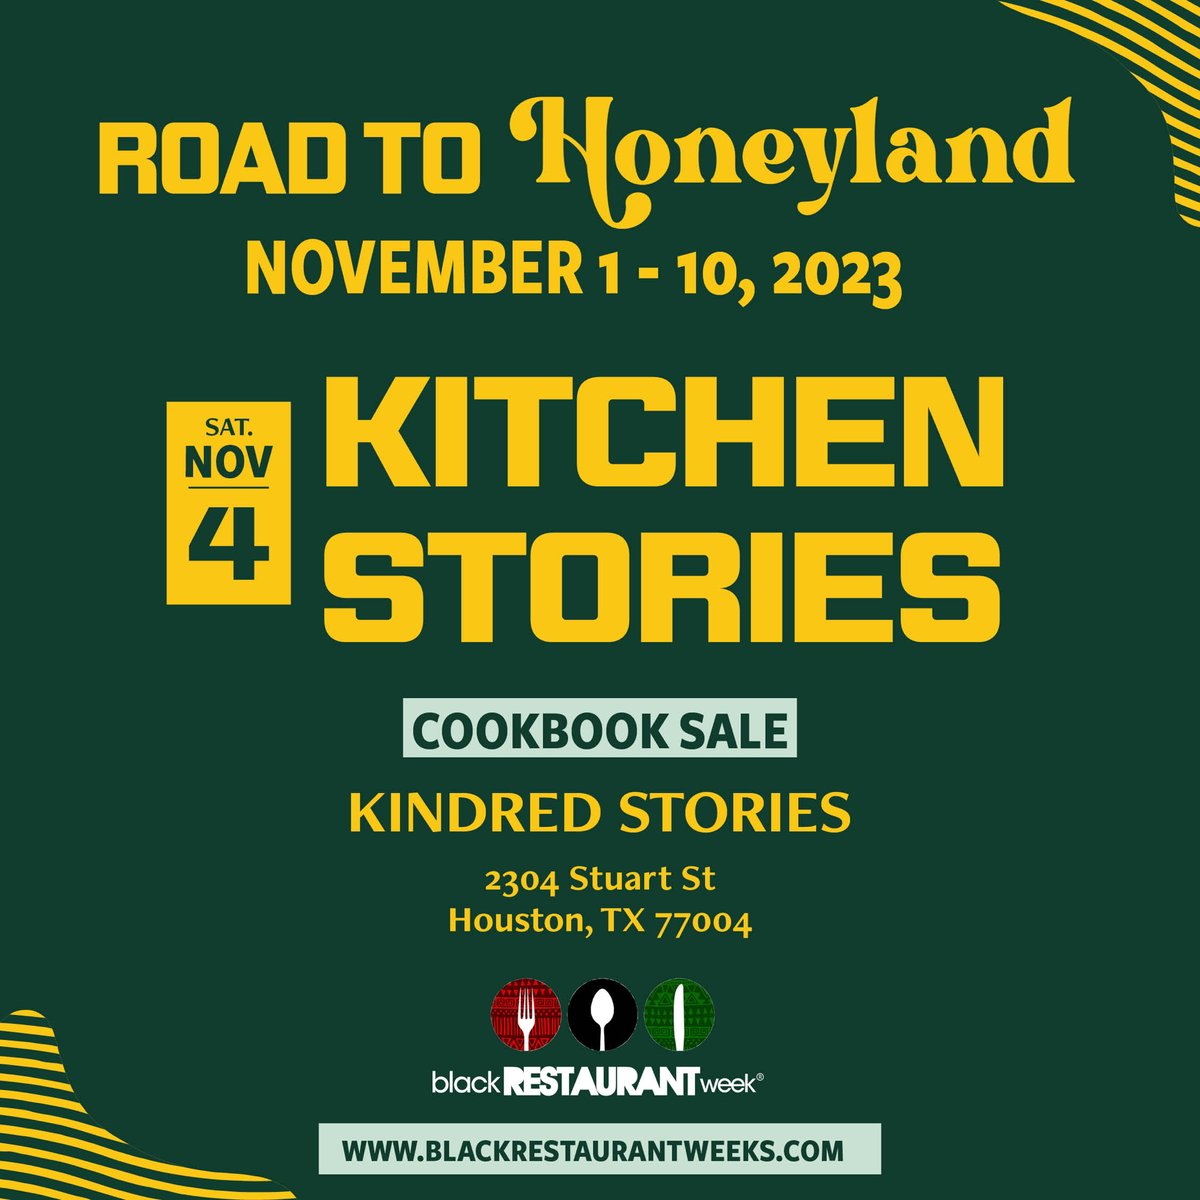 Are y’all headed to Honeyland Fest next week? 👀 We are collaborating with Honeyland to offer 15% off cookbooks in-store from 11/10-11/12! If you’ve been wanting to grab a copy of Black Power Kitchen by @ghettogastro, you can get a free Ghetto Gastro t -shirt when you purchase